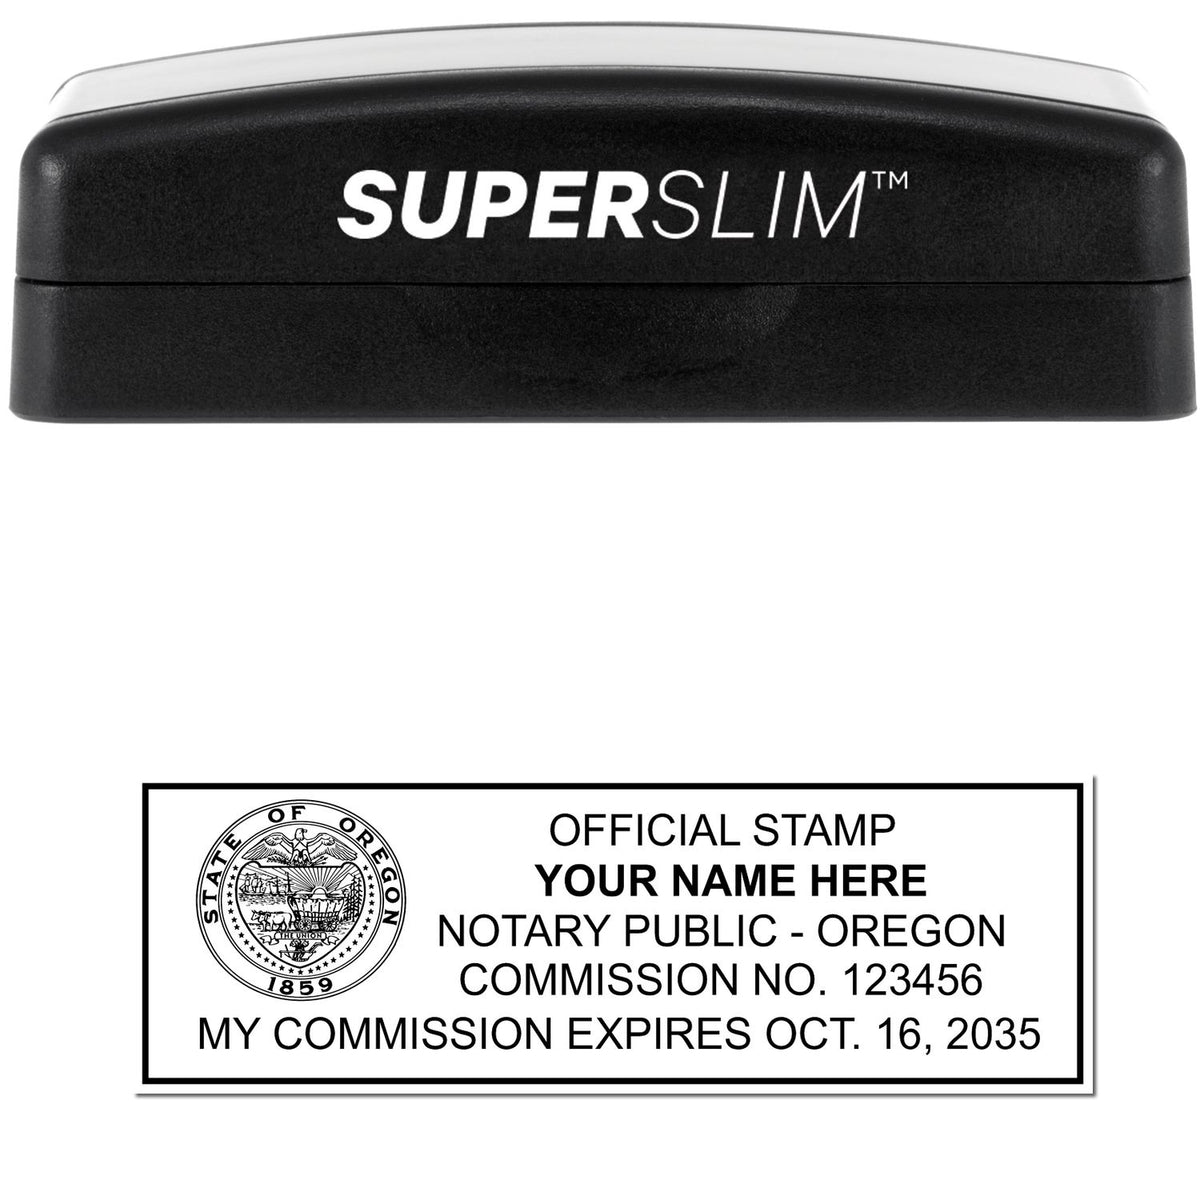 The main image for the Super Slim Oregon Notary Public Stamp depicting a sample of the imprint and electronic files